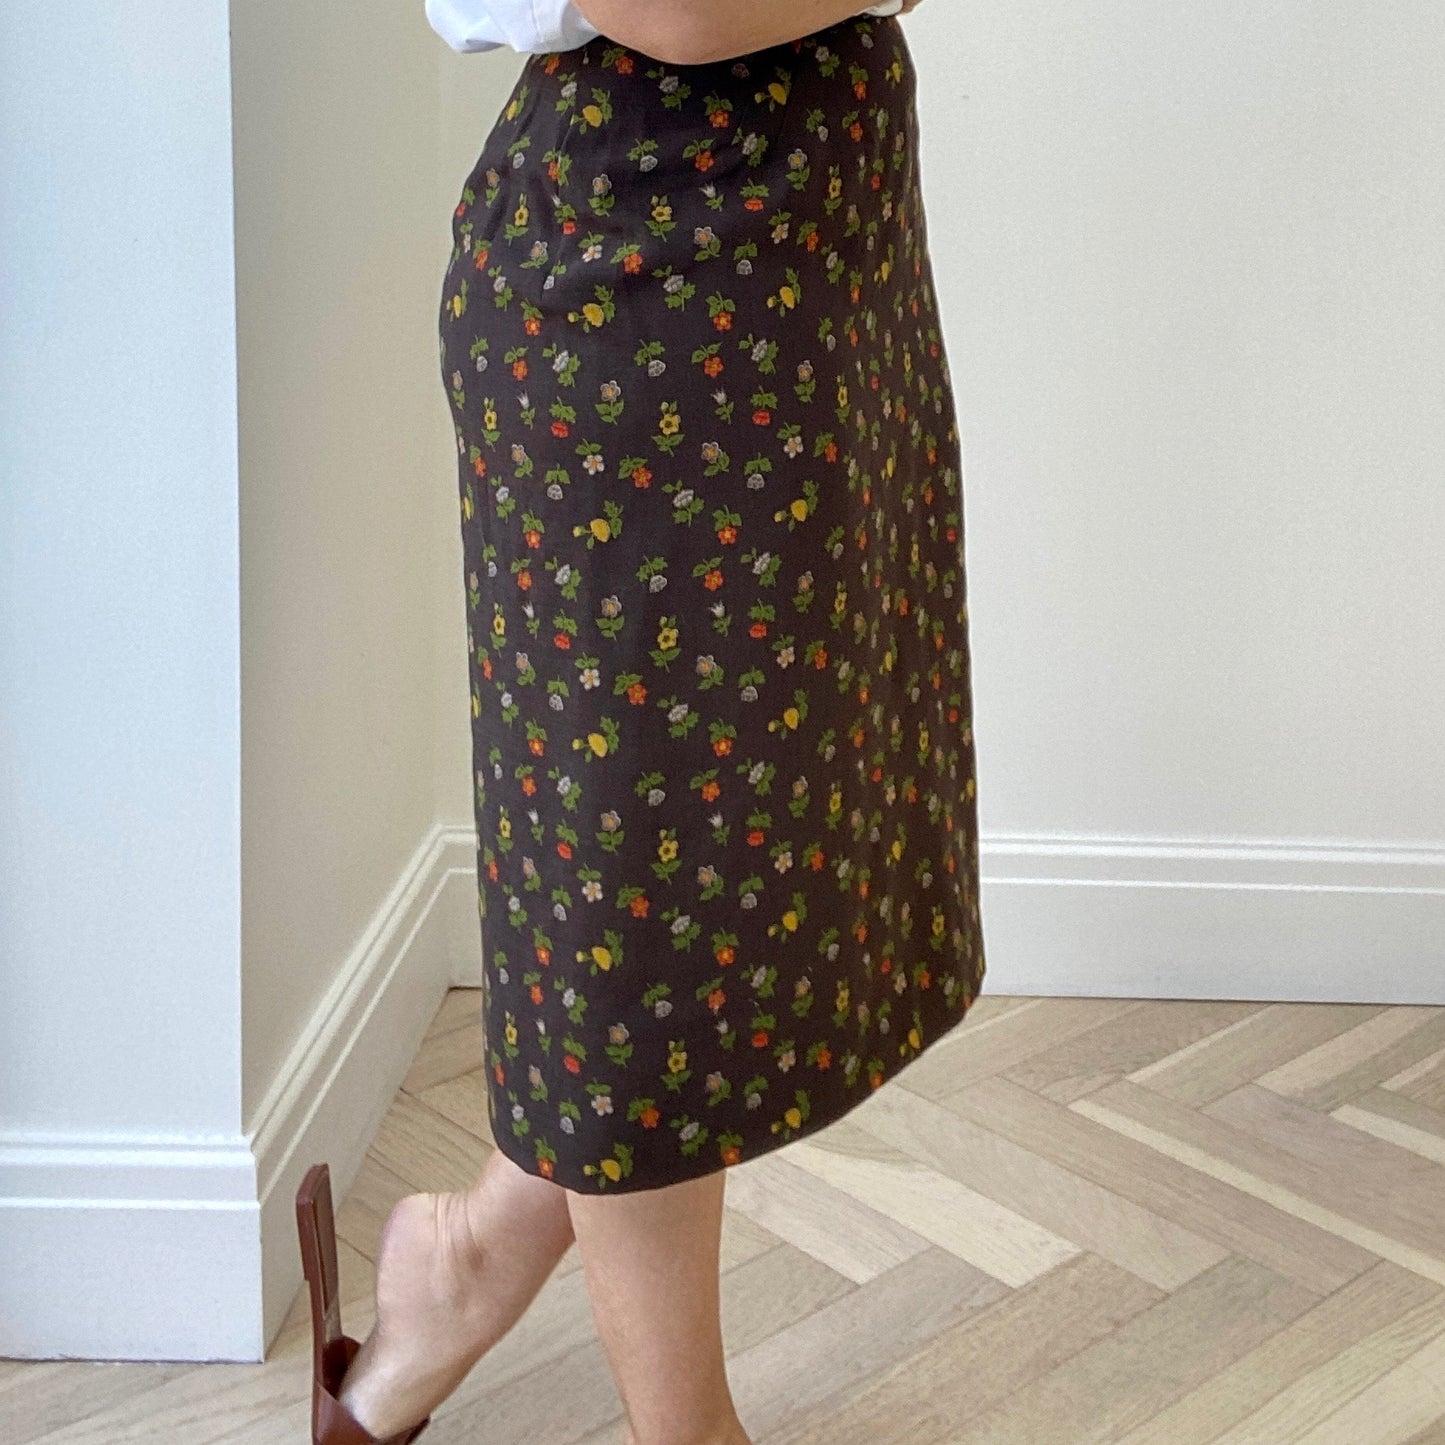 Floral 70s Skirt was £29